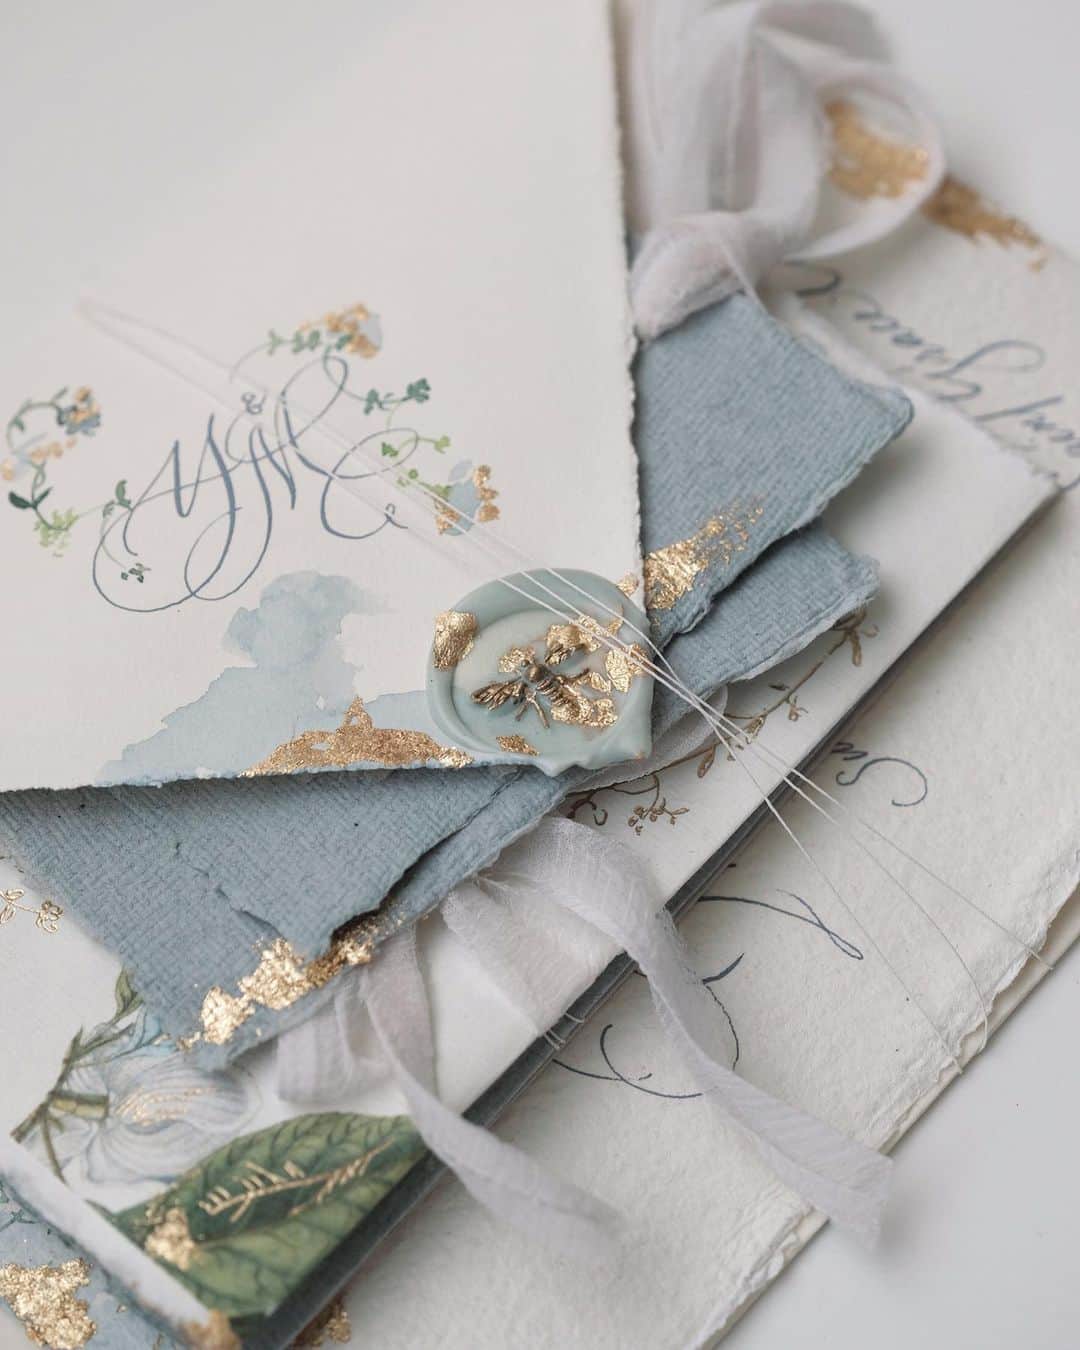 Veronica Halimさんのインスタグラム写真 - (Veronica HalimInstagram)「日本の素敵なカップルのため、 Handmade Styled Shoot Invitation Set「手書き撮影用招待状セット」。新型コロナウィルス感染症の影響で多くの人が結婚式のスケジュールを調整されよりプライベートなパーティーに変更した方々も多いではないかと思います。その特別な日の形見とお祝いを形にするように今回の手書き招待状を作りました。   Handmade Styled Shoot Invitation Set for a sweet couple in Japan. Due to the pandemic many people decided to postponed their reception party and decided to go ahead with an intimate ceremony with family and close friends. This handmade invitation was created as a special keepsake and part of the celebratory that captured the precious moment. —   #vhcalligraphy #truffypi #カリグラフィー #カリグラフィースタイリング #モダンカリグラフィー #calligraphystyling #カリグラフィーワークショップ #weddingstationery #moderncalligraphy #handmadepaper  #penmanship #ウェディング #ウェディングアイテム #カリグラファ #スタイリングワークショップ #スタイリング #prettypapers #weddingsuite #styledshootbundle」12月3日 0時08分 - truffypi